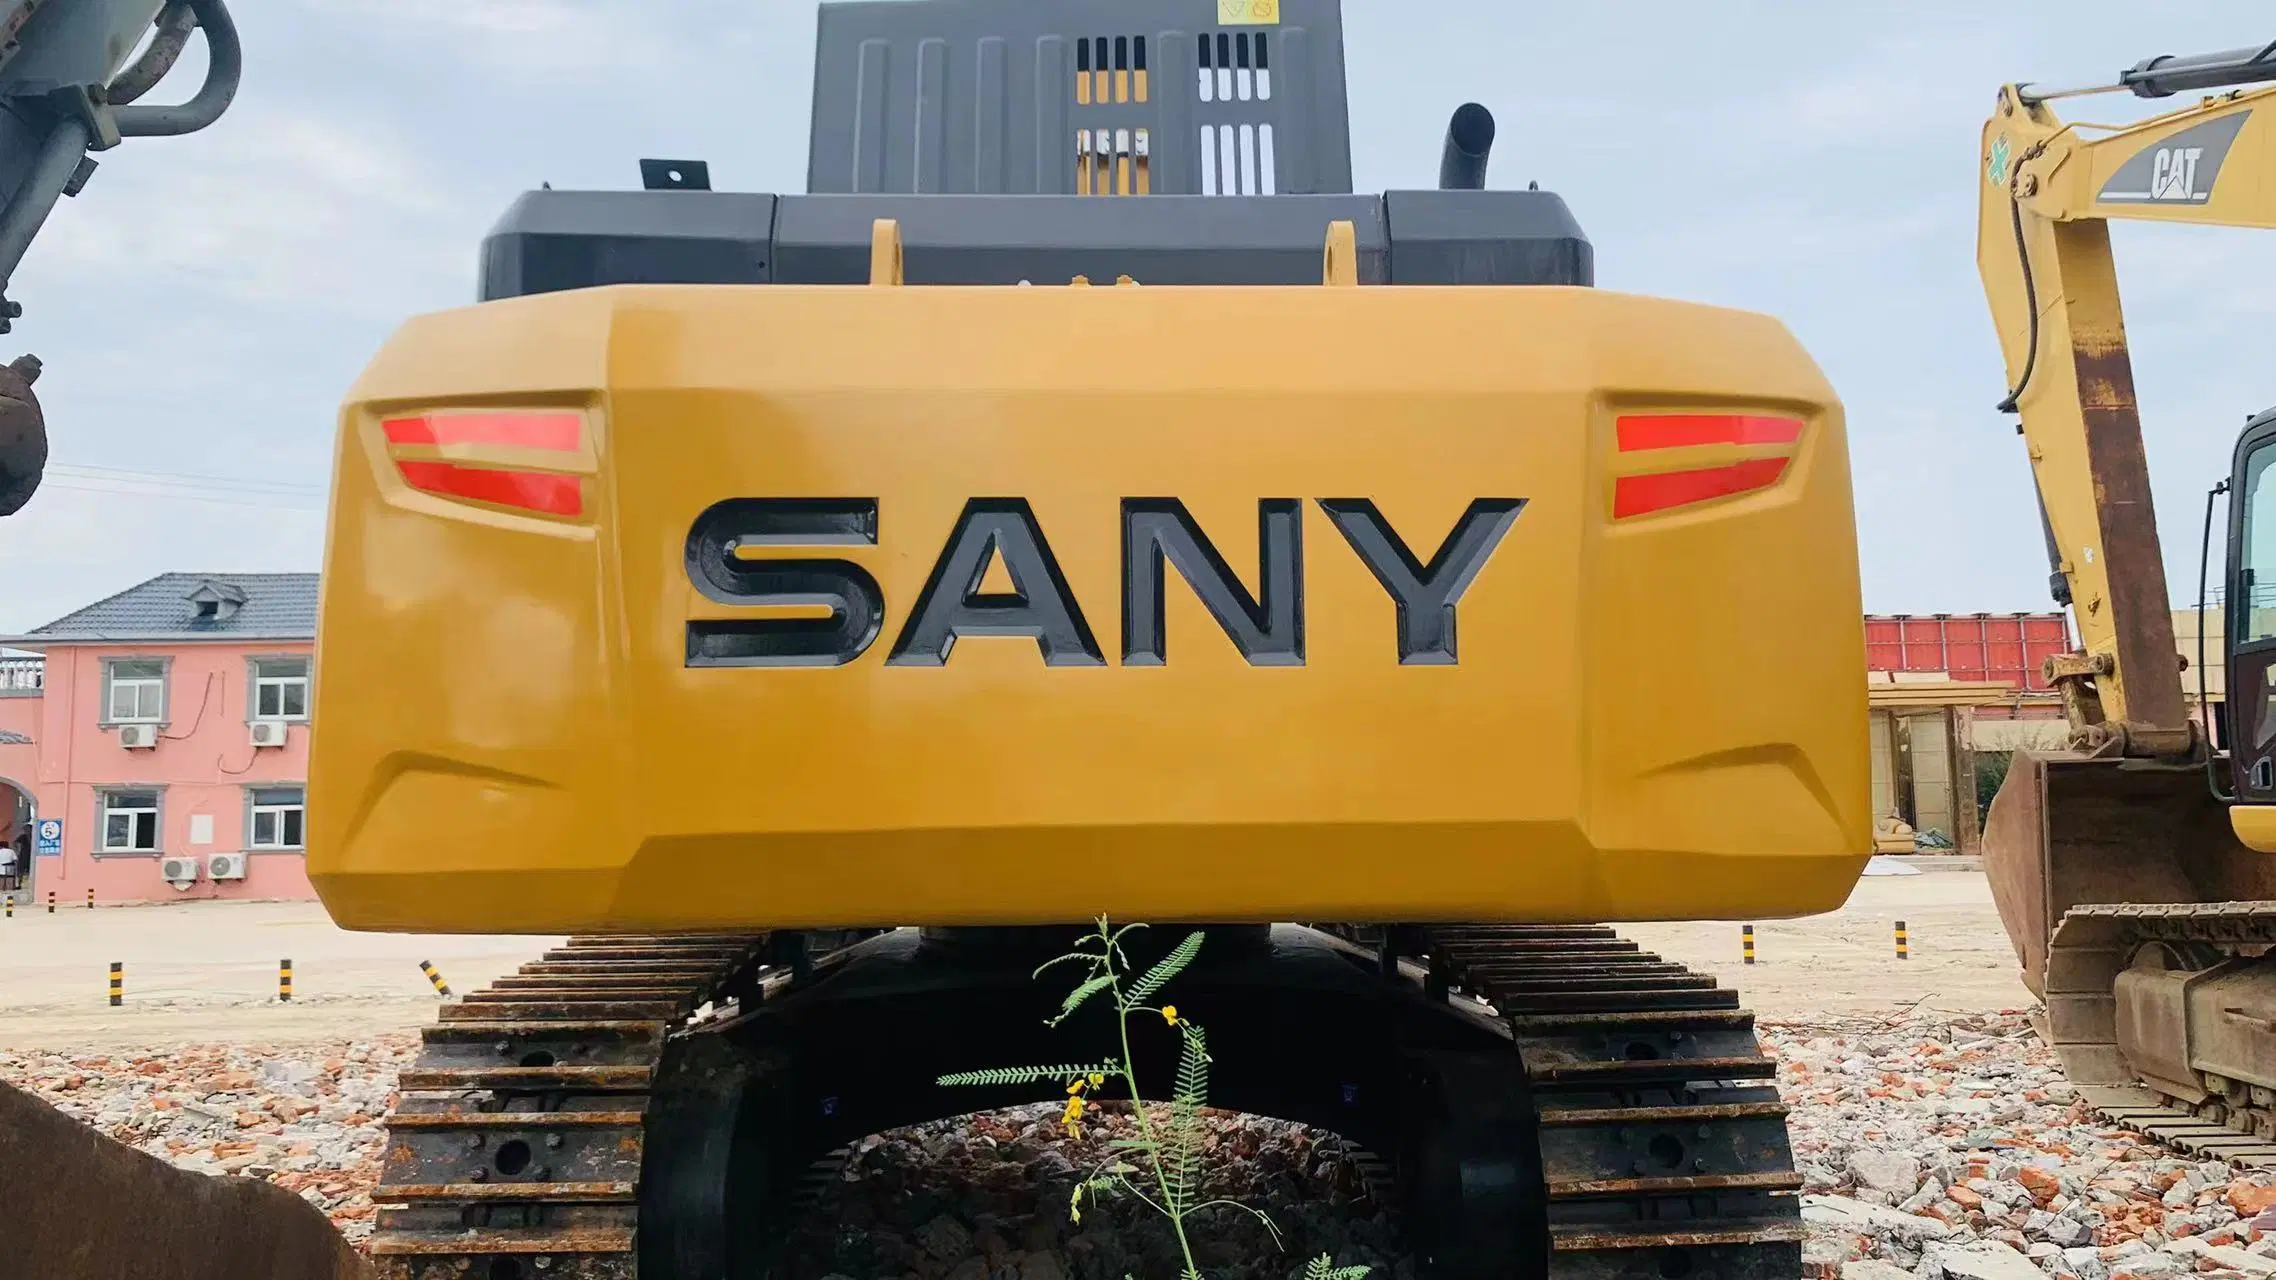 Sany Sy485h 50ton Excavator Trencher Lowes Post Hole Digger Second Hand Excavator Sany Sy485h for Sale